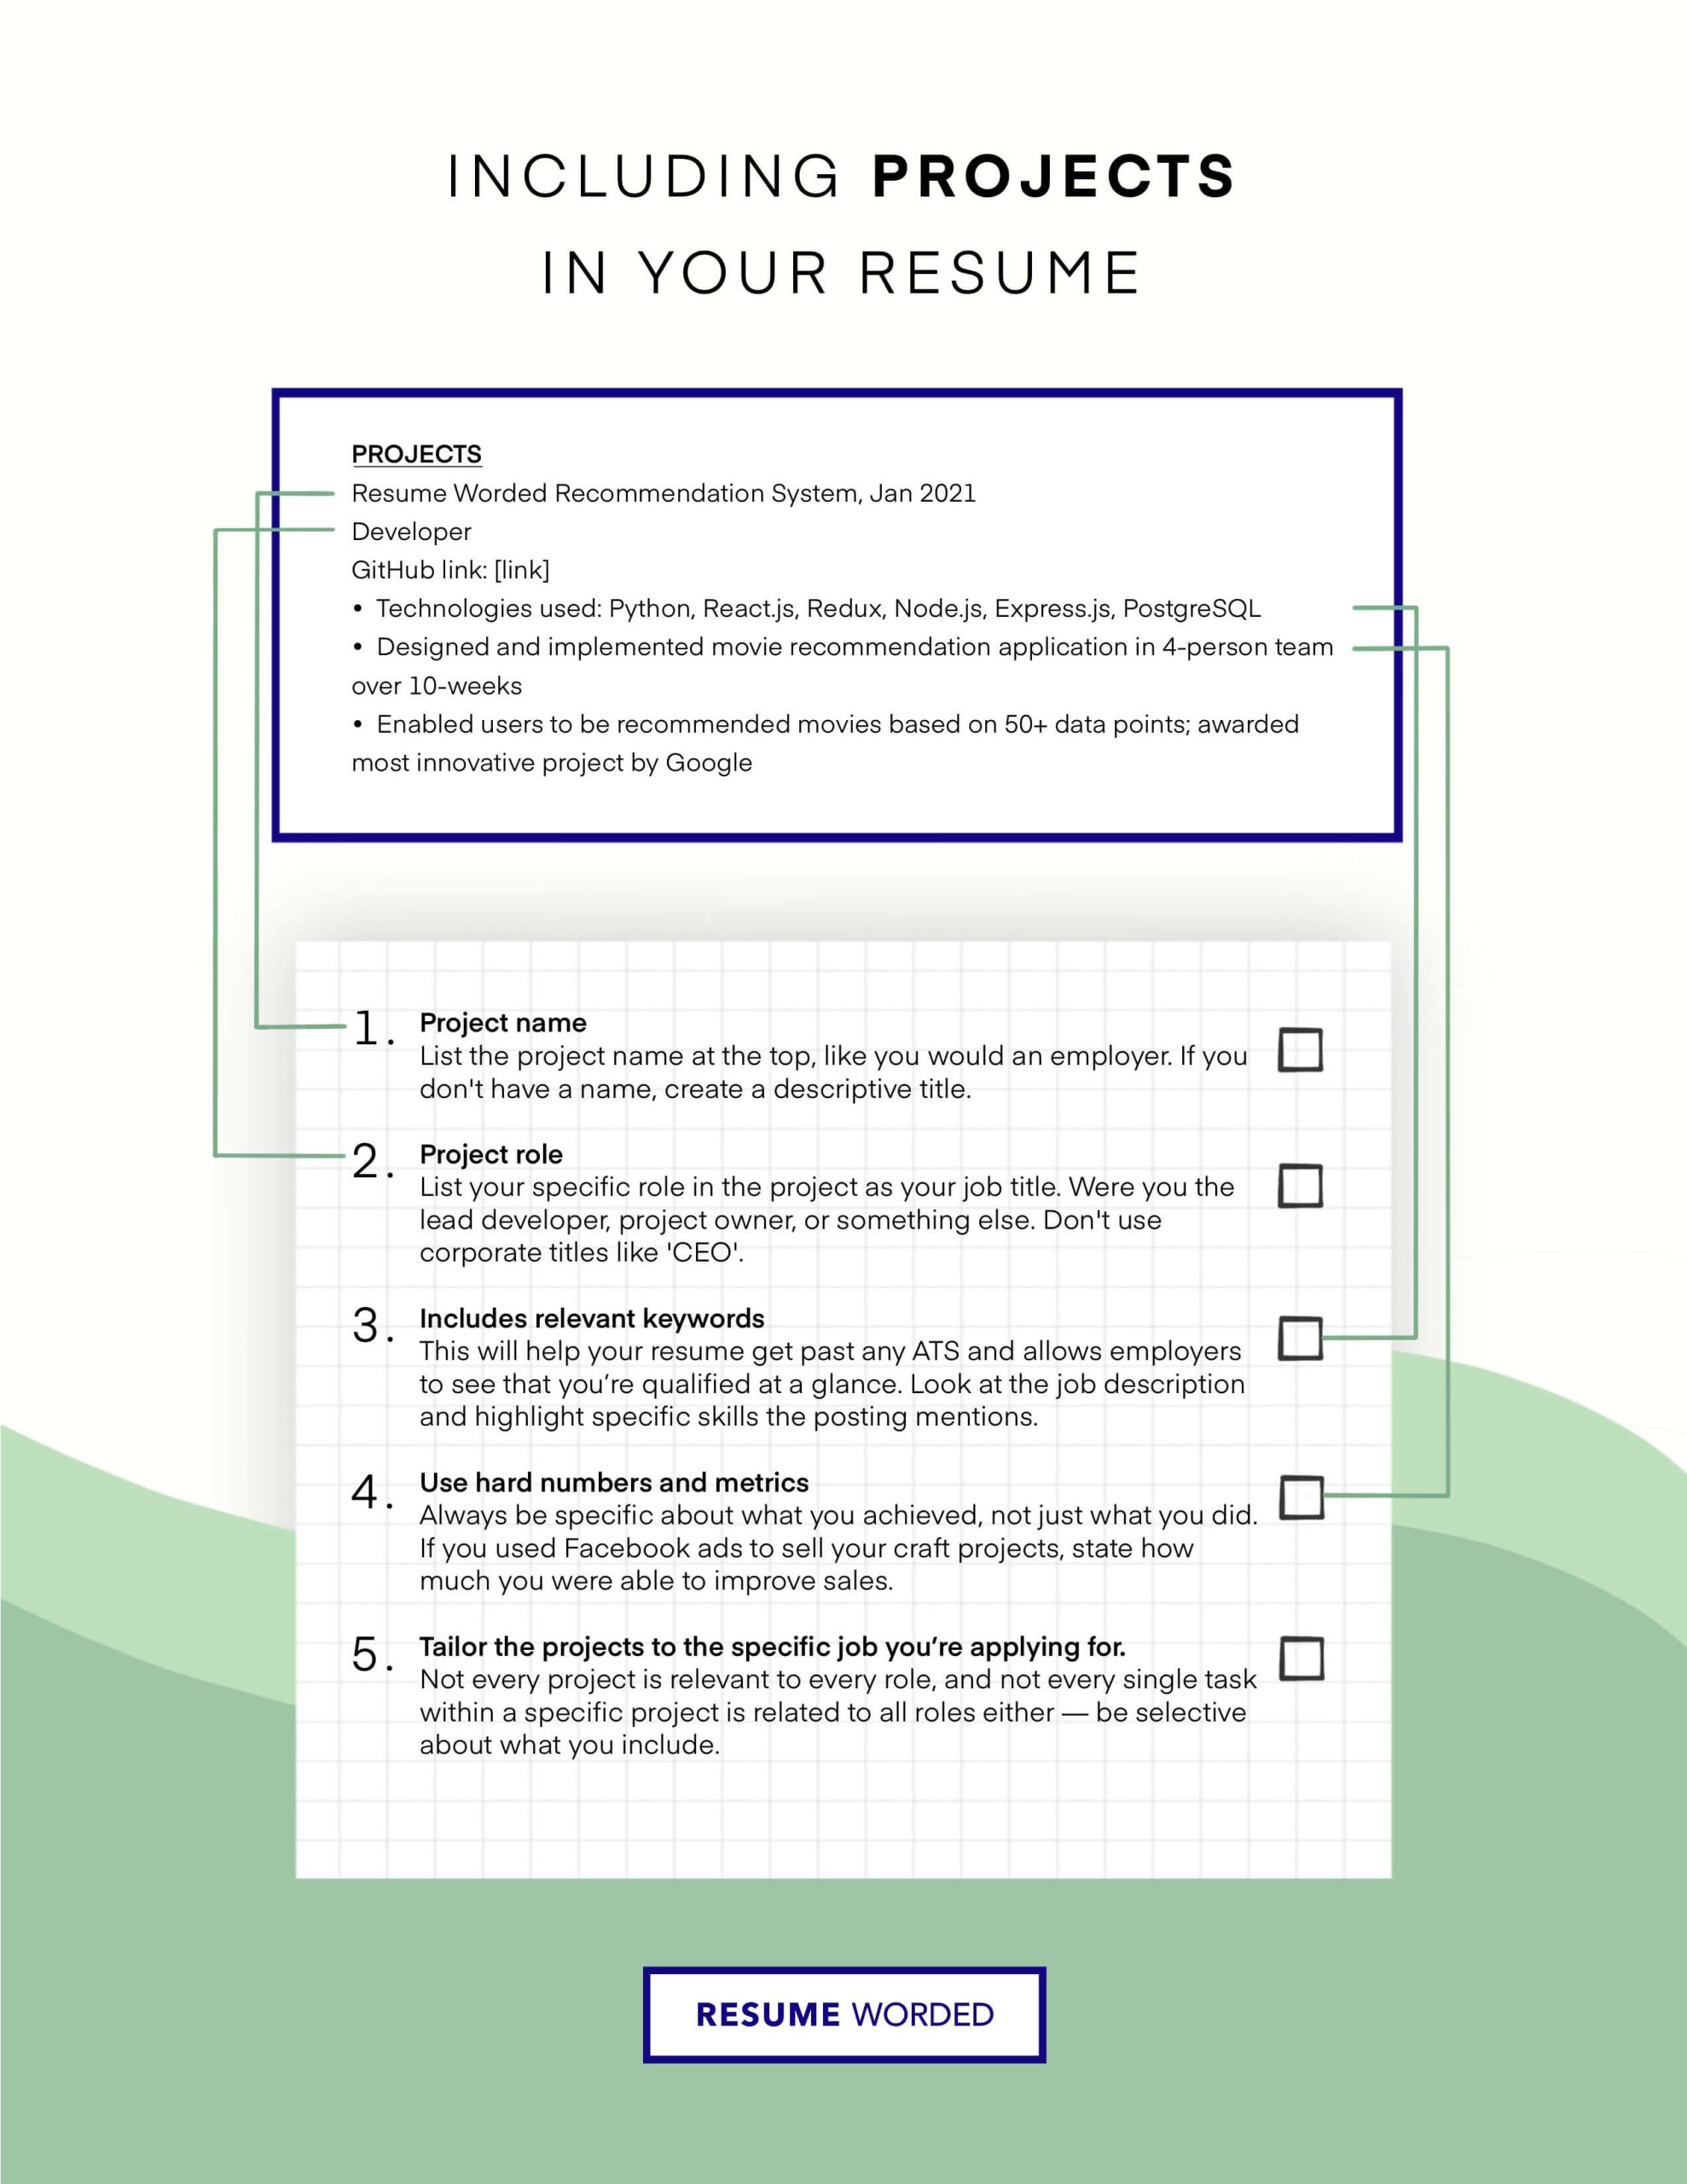 Masters Students Sample Project Resume On Big Data How to List Projects On A Resume